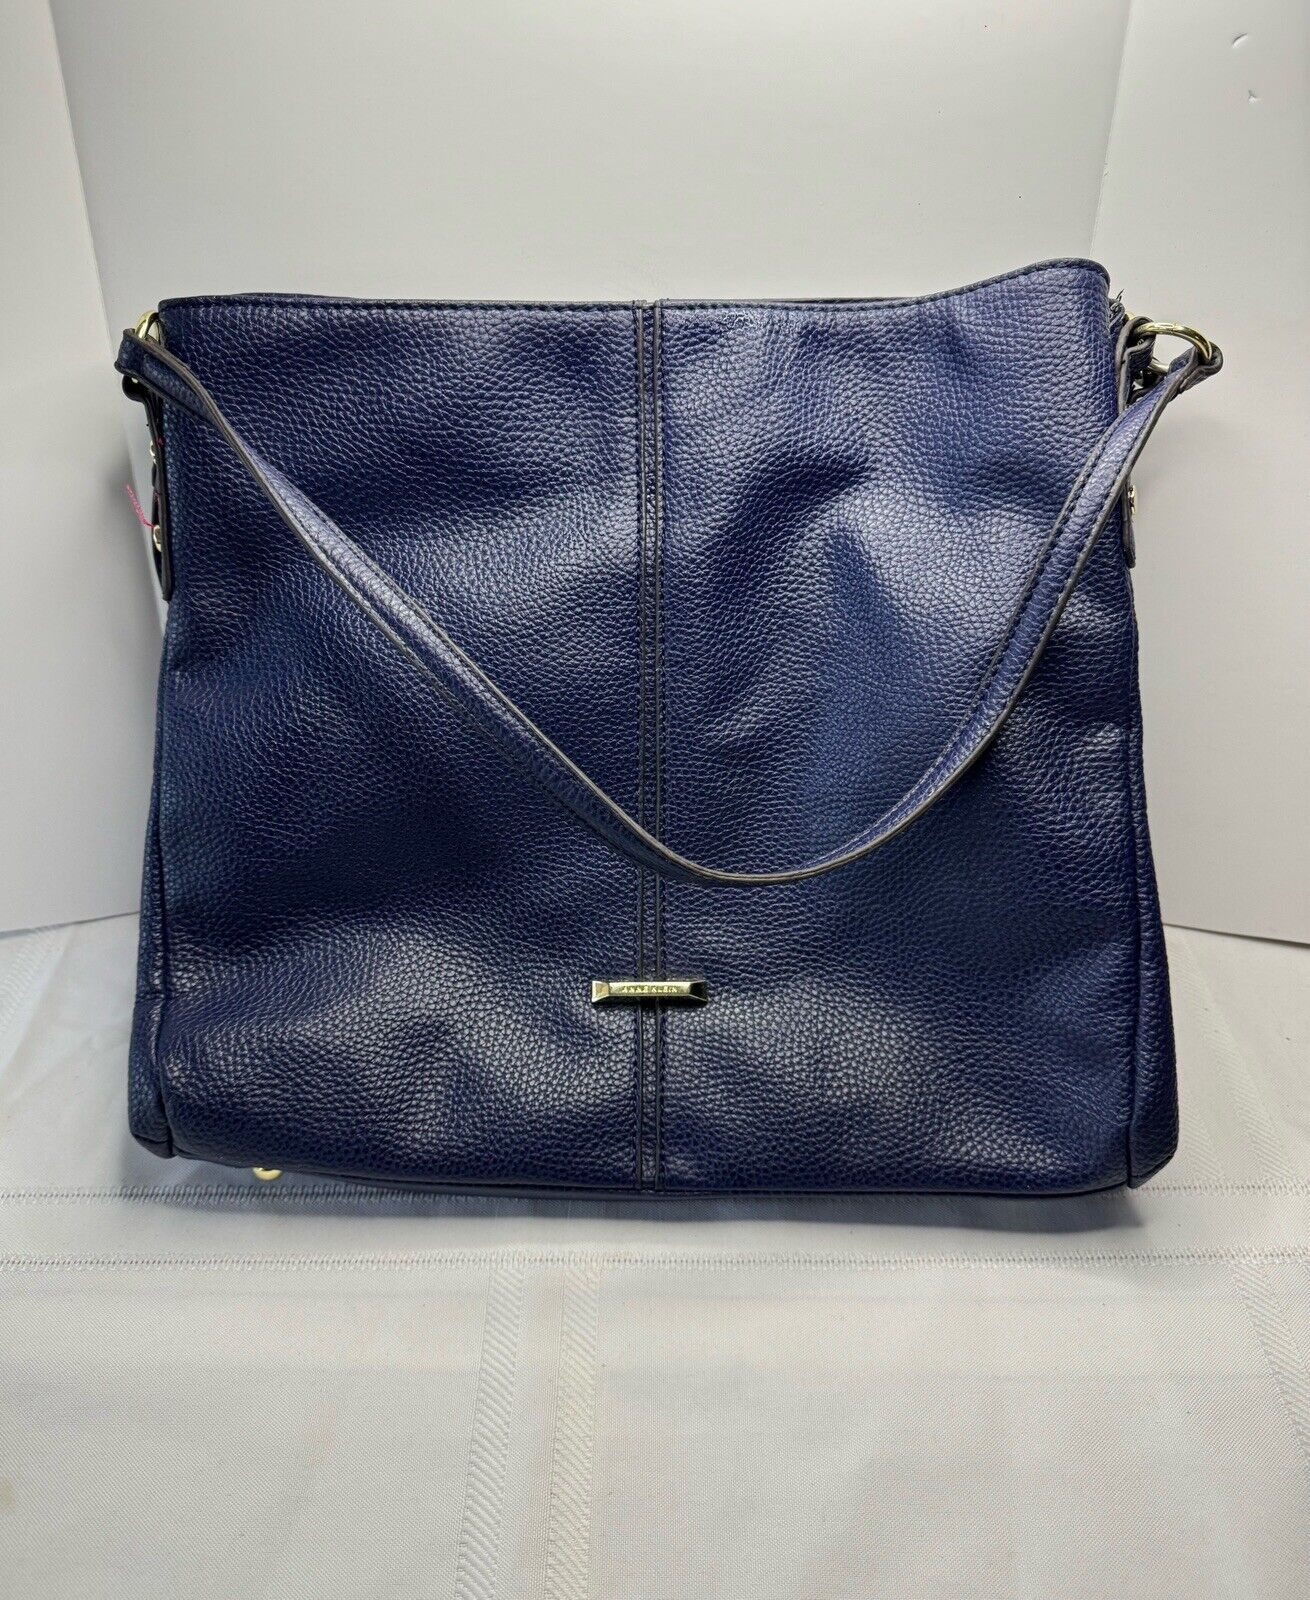 Anne Klein Navy Blue Faux Leather Tote Bag Purse - image 1